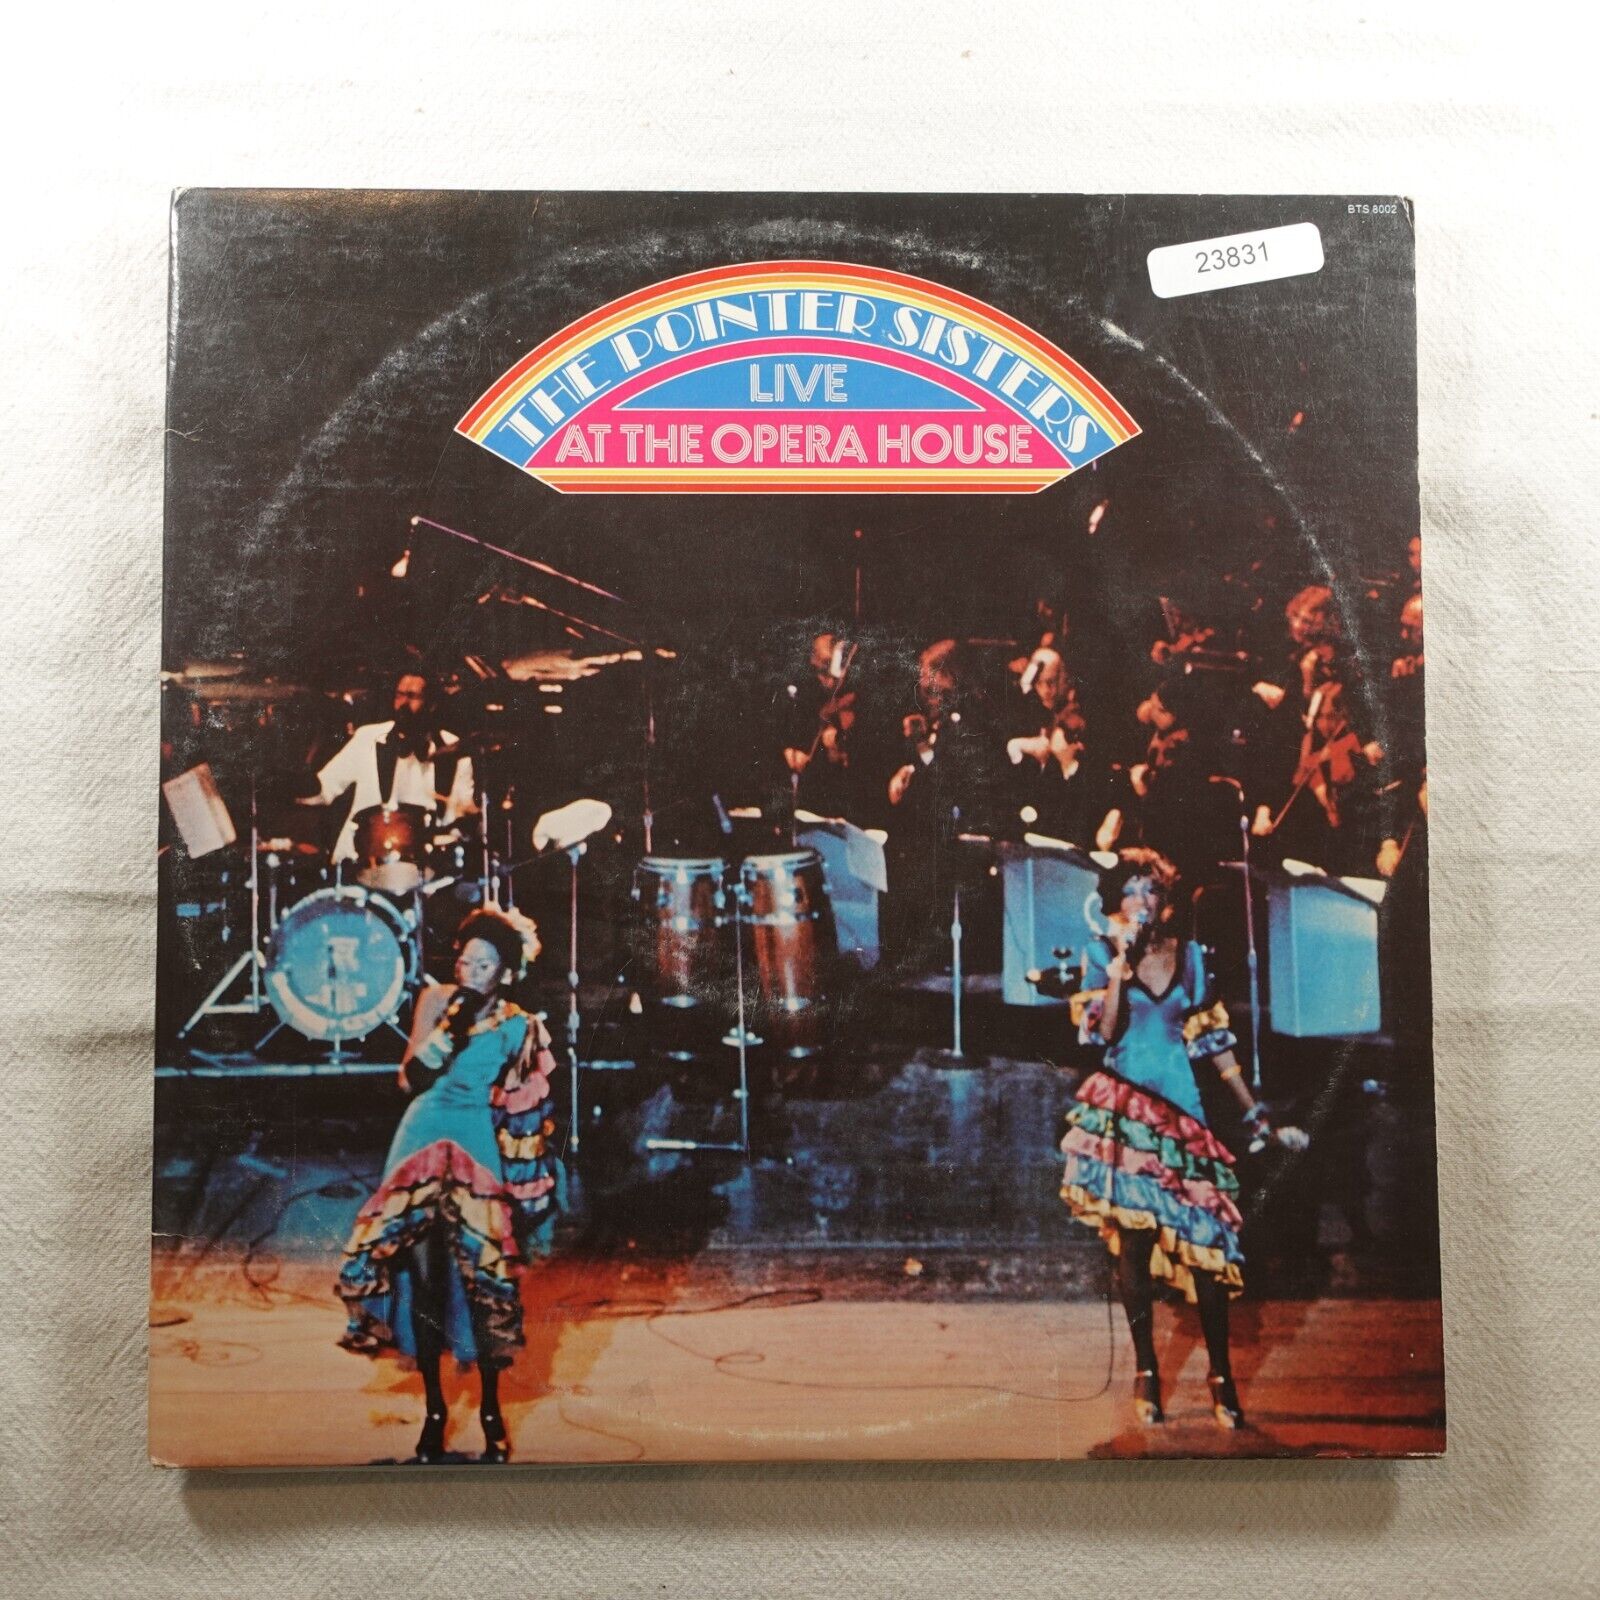 The Pointer Sisters Live At The Opera House   Record Album Vinyl LP